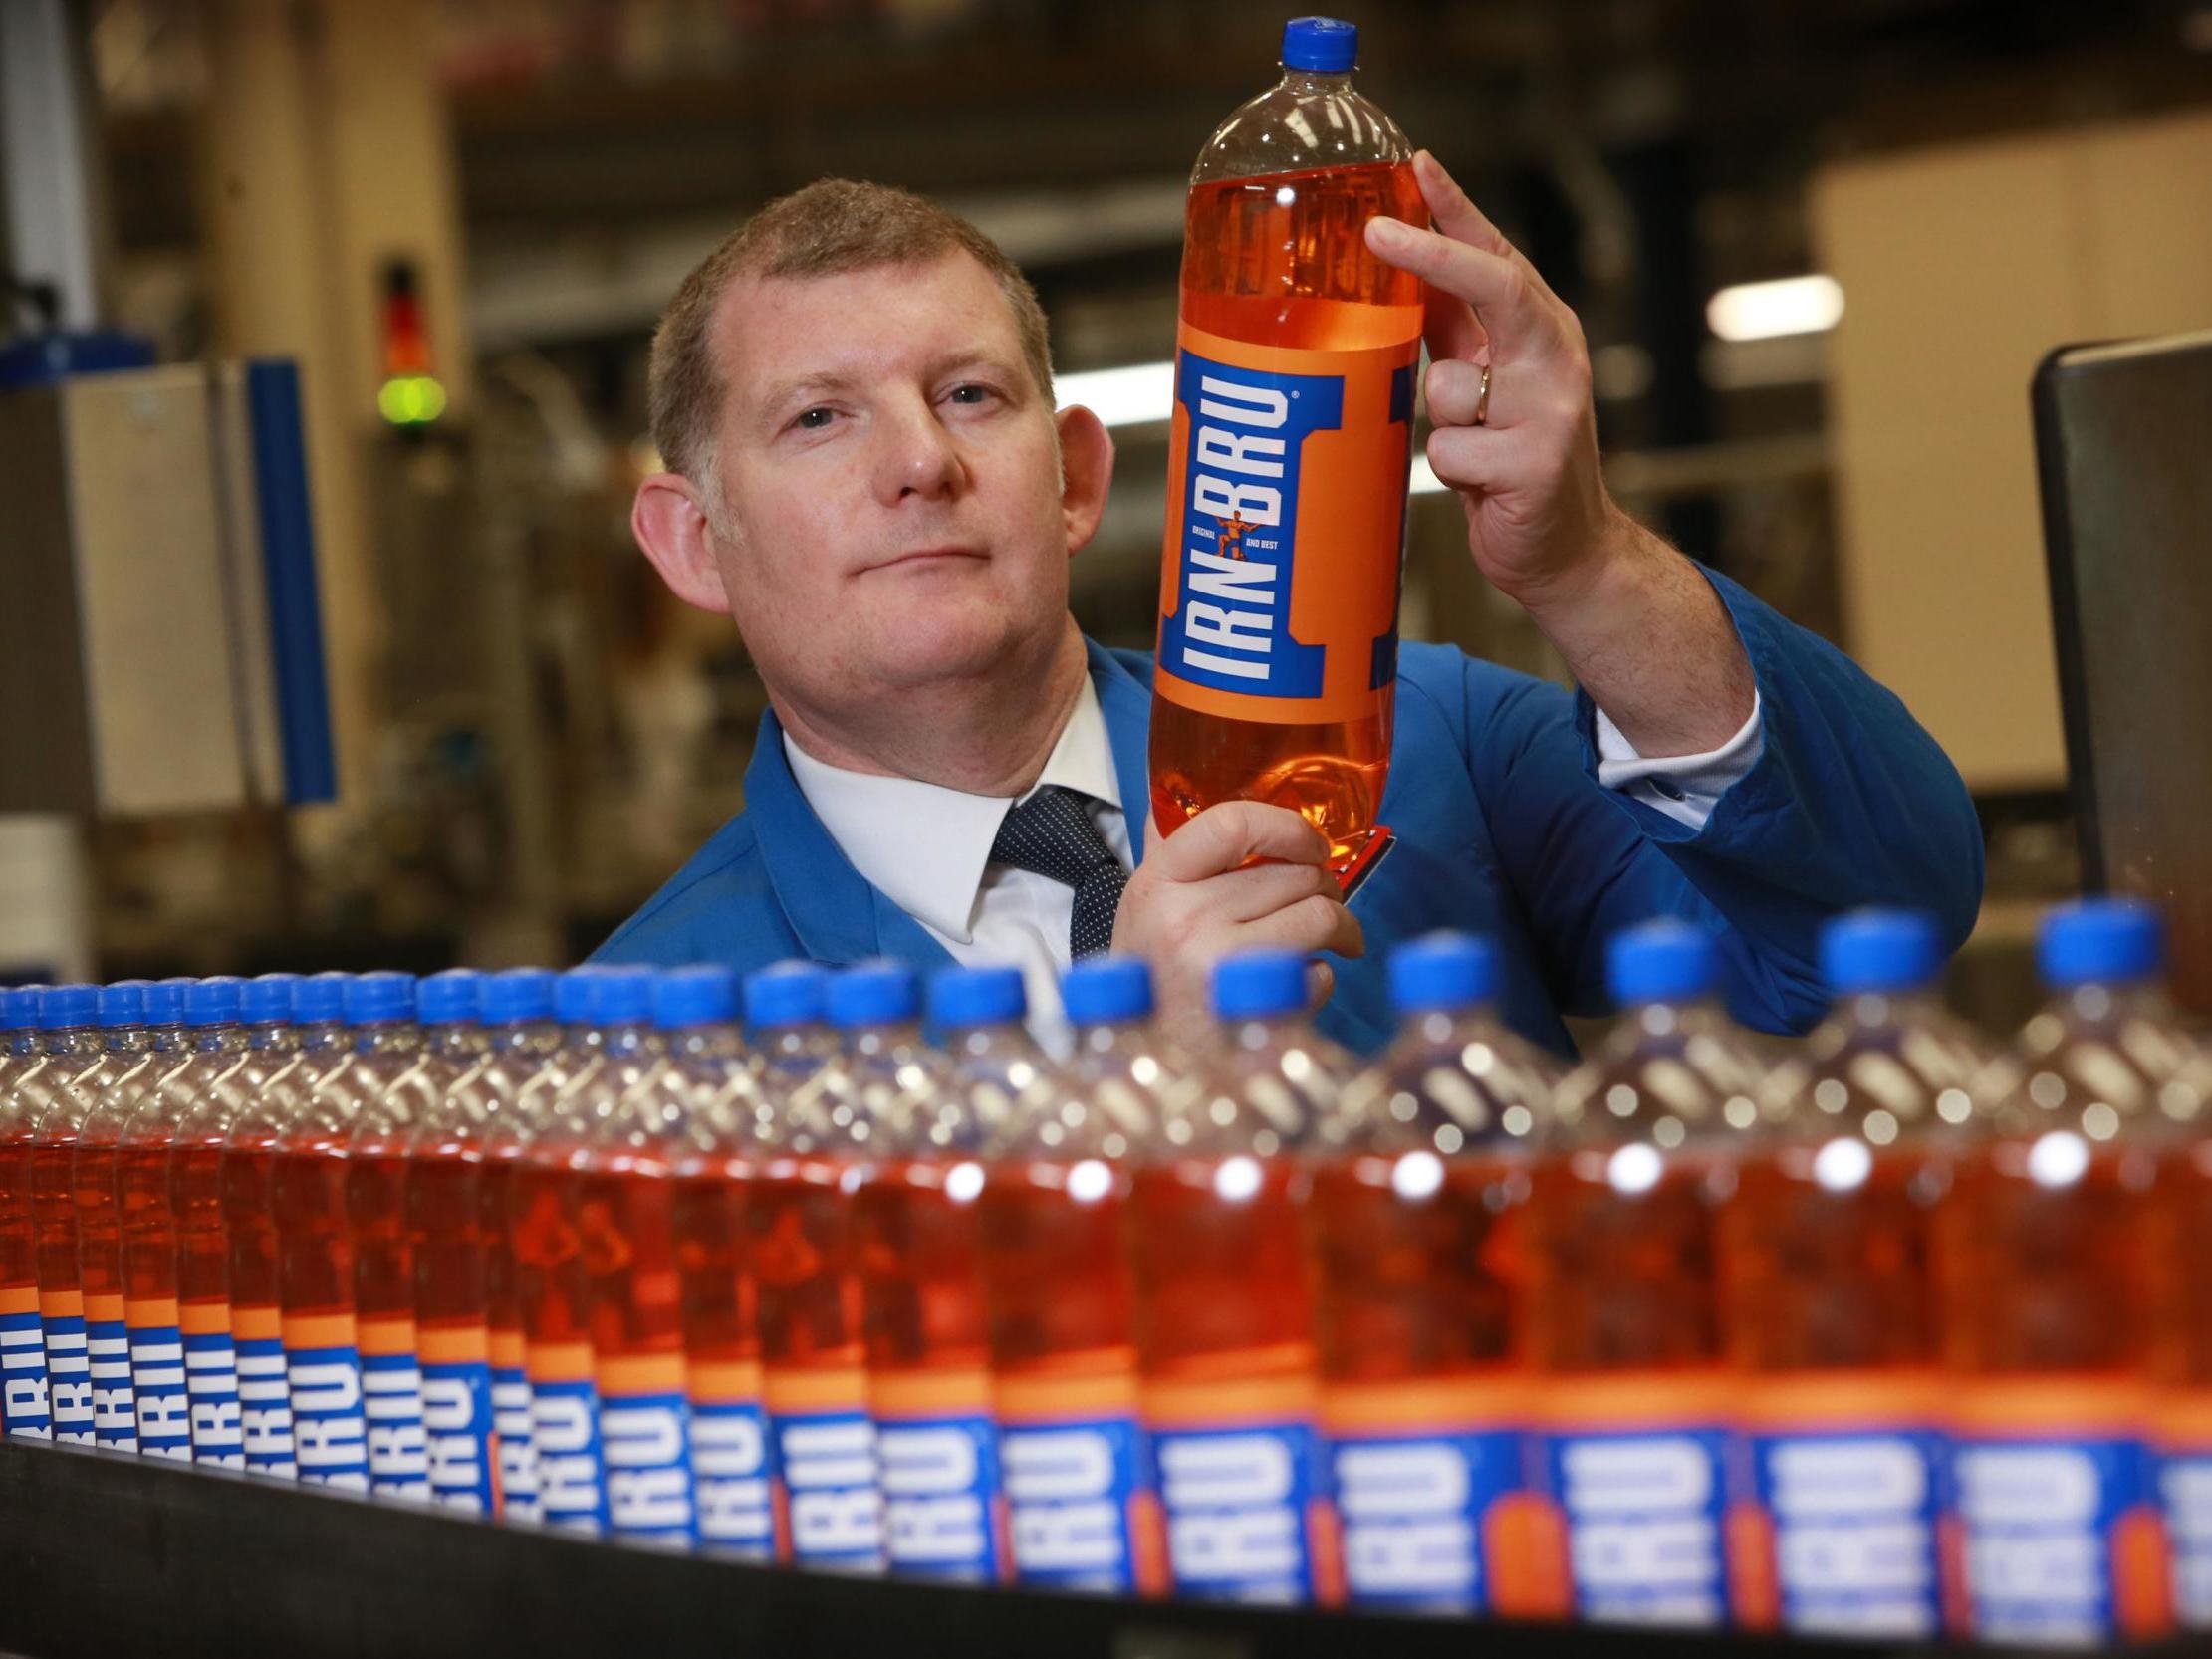 AG Barr claims most people will not taste the difference in the new Irn Bru recipe